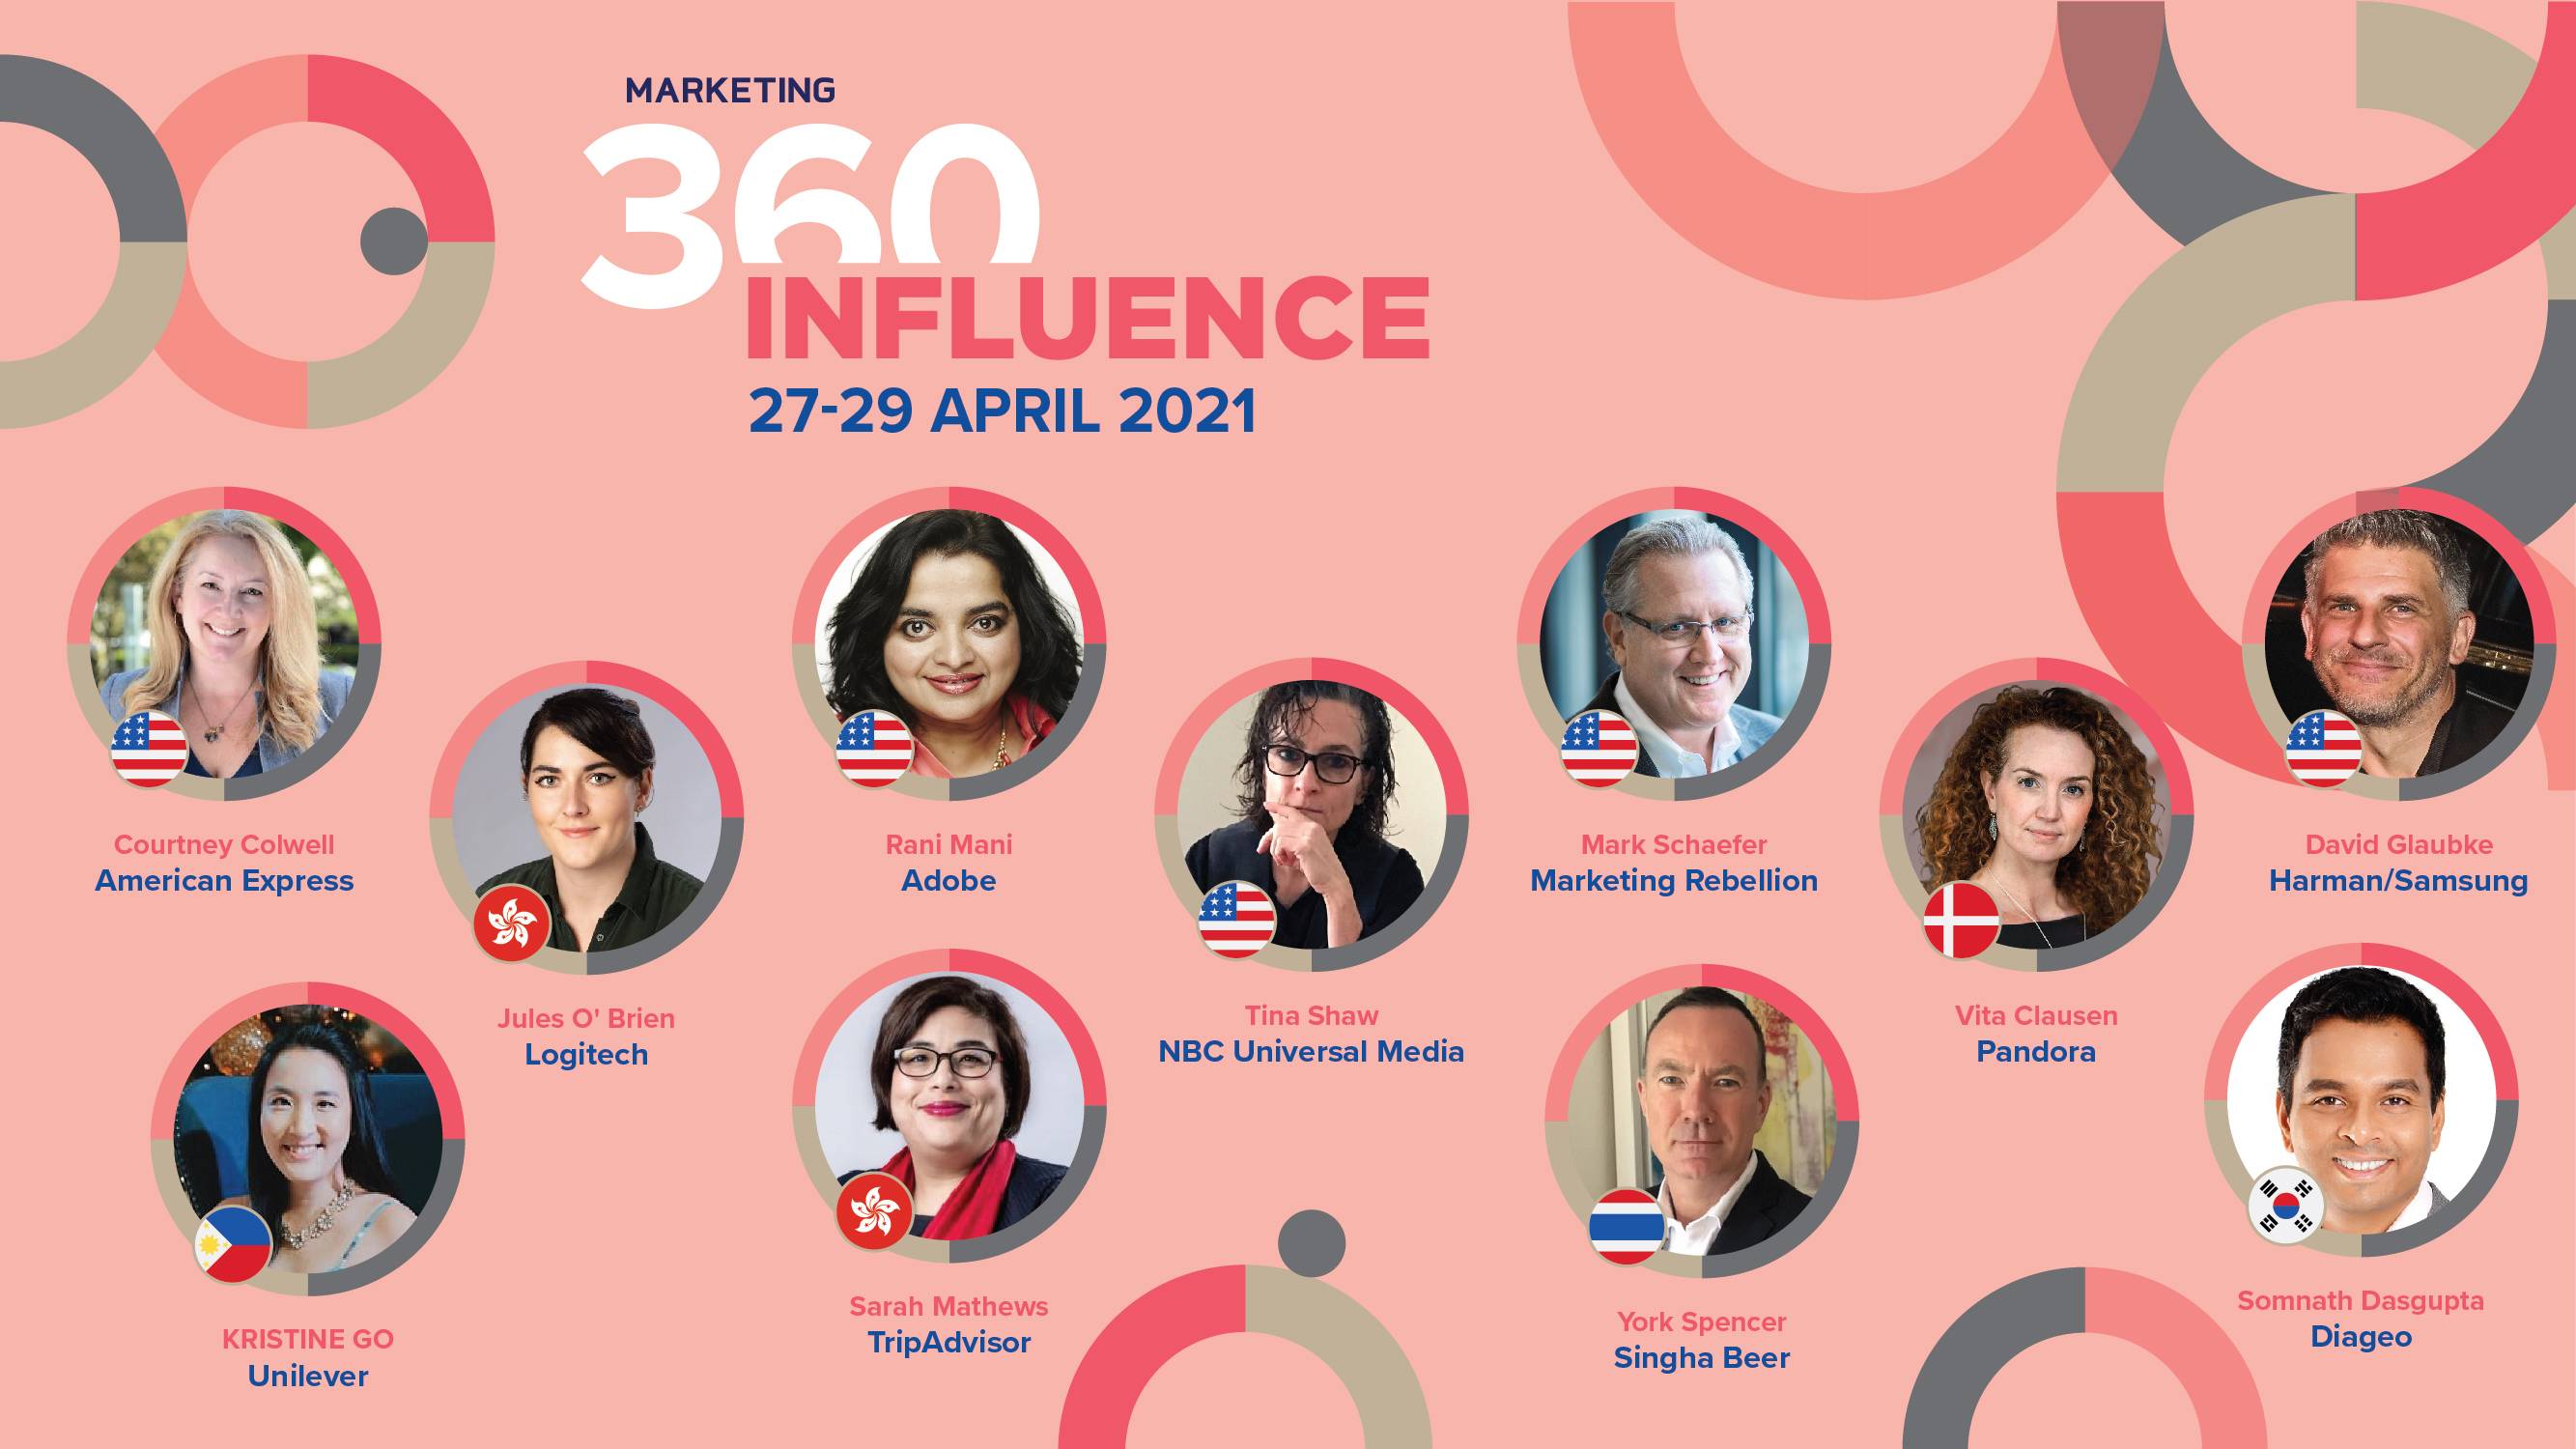 Article about Registration is open now for Influence 360